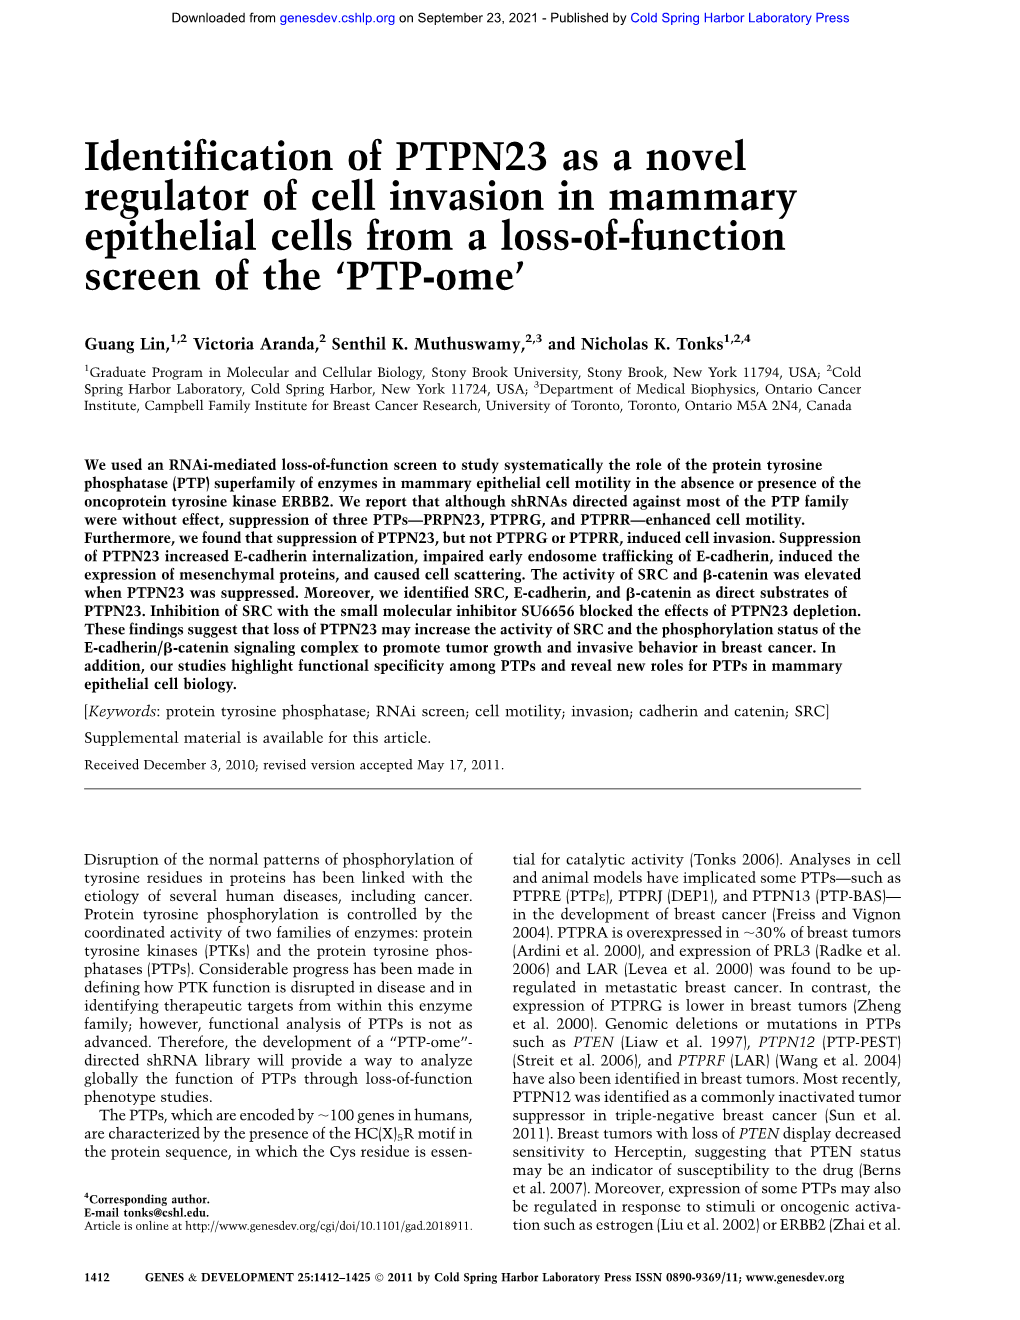 Identification of PTPN23 As a Novel Regulator of Cell Invasion in Mammary Epithelial Cells from a Loss-Of-Function Screen of the ‘PTP-Ome’